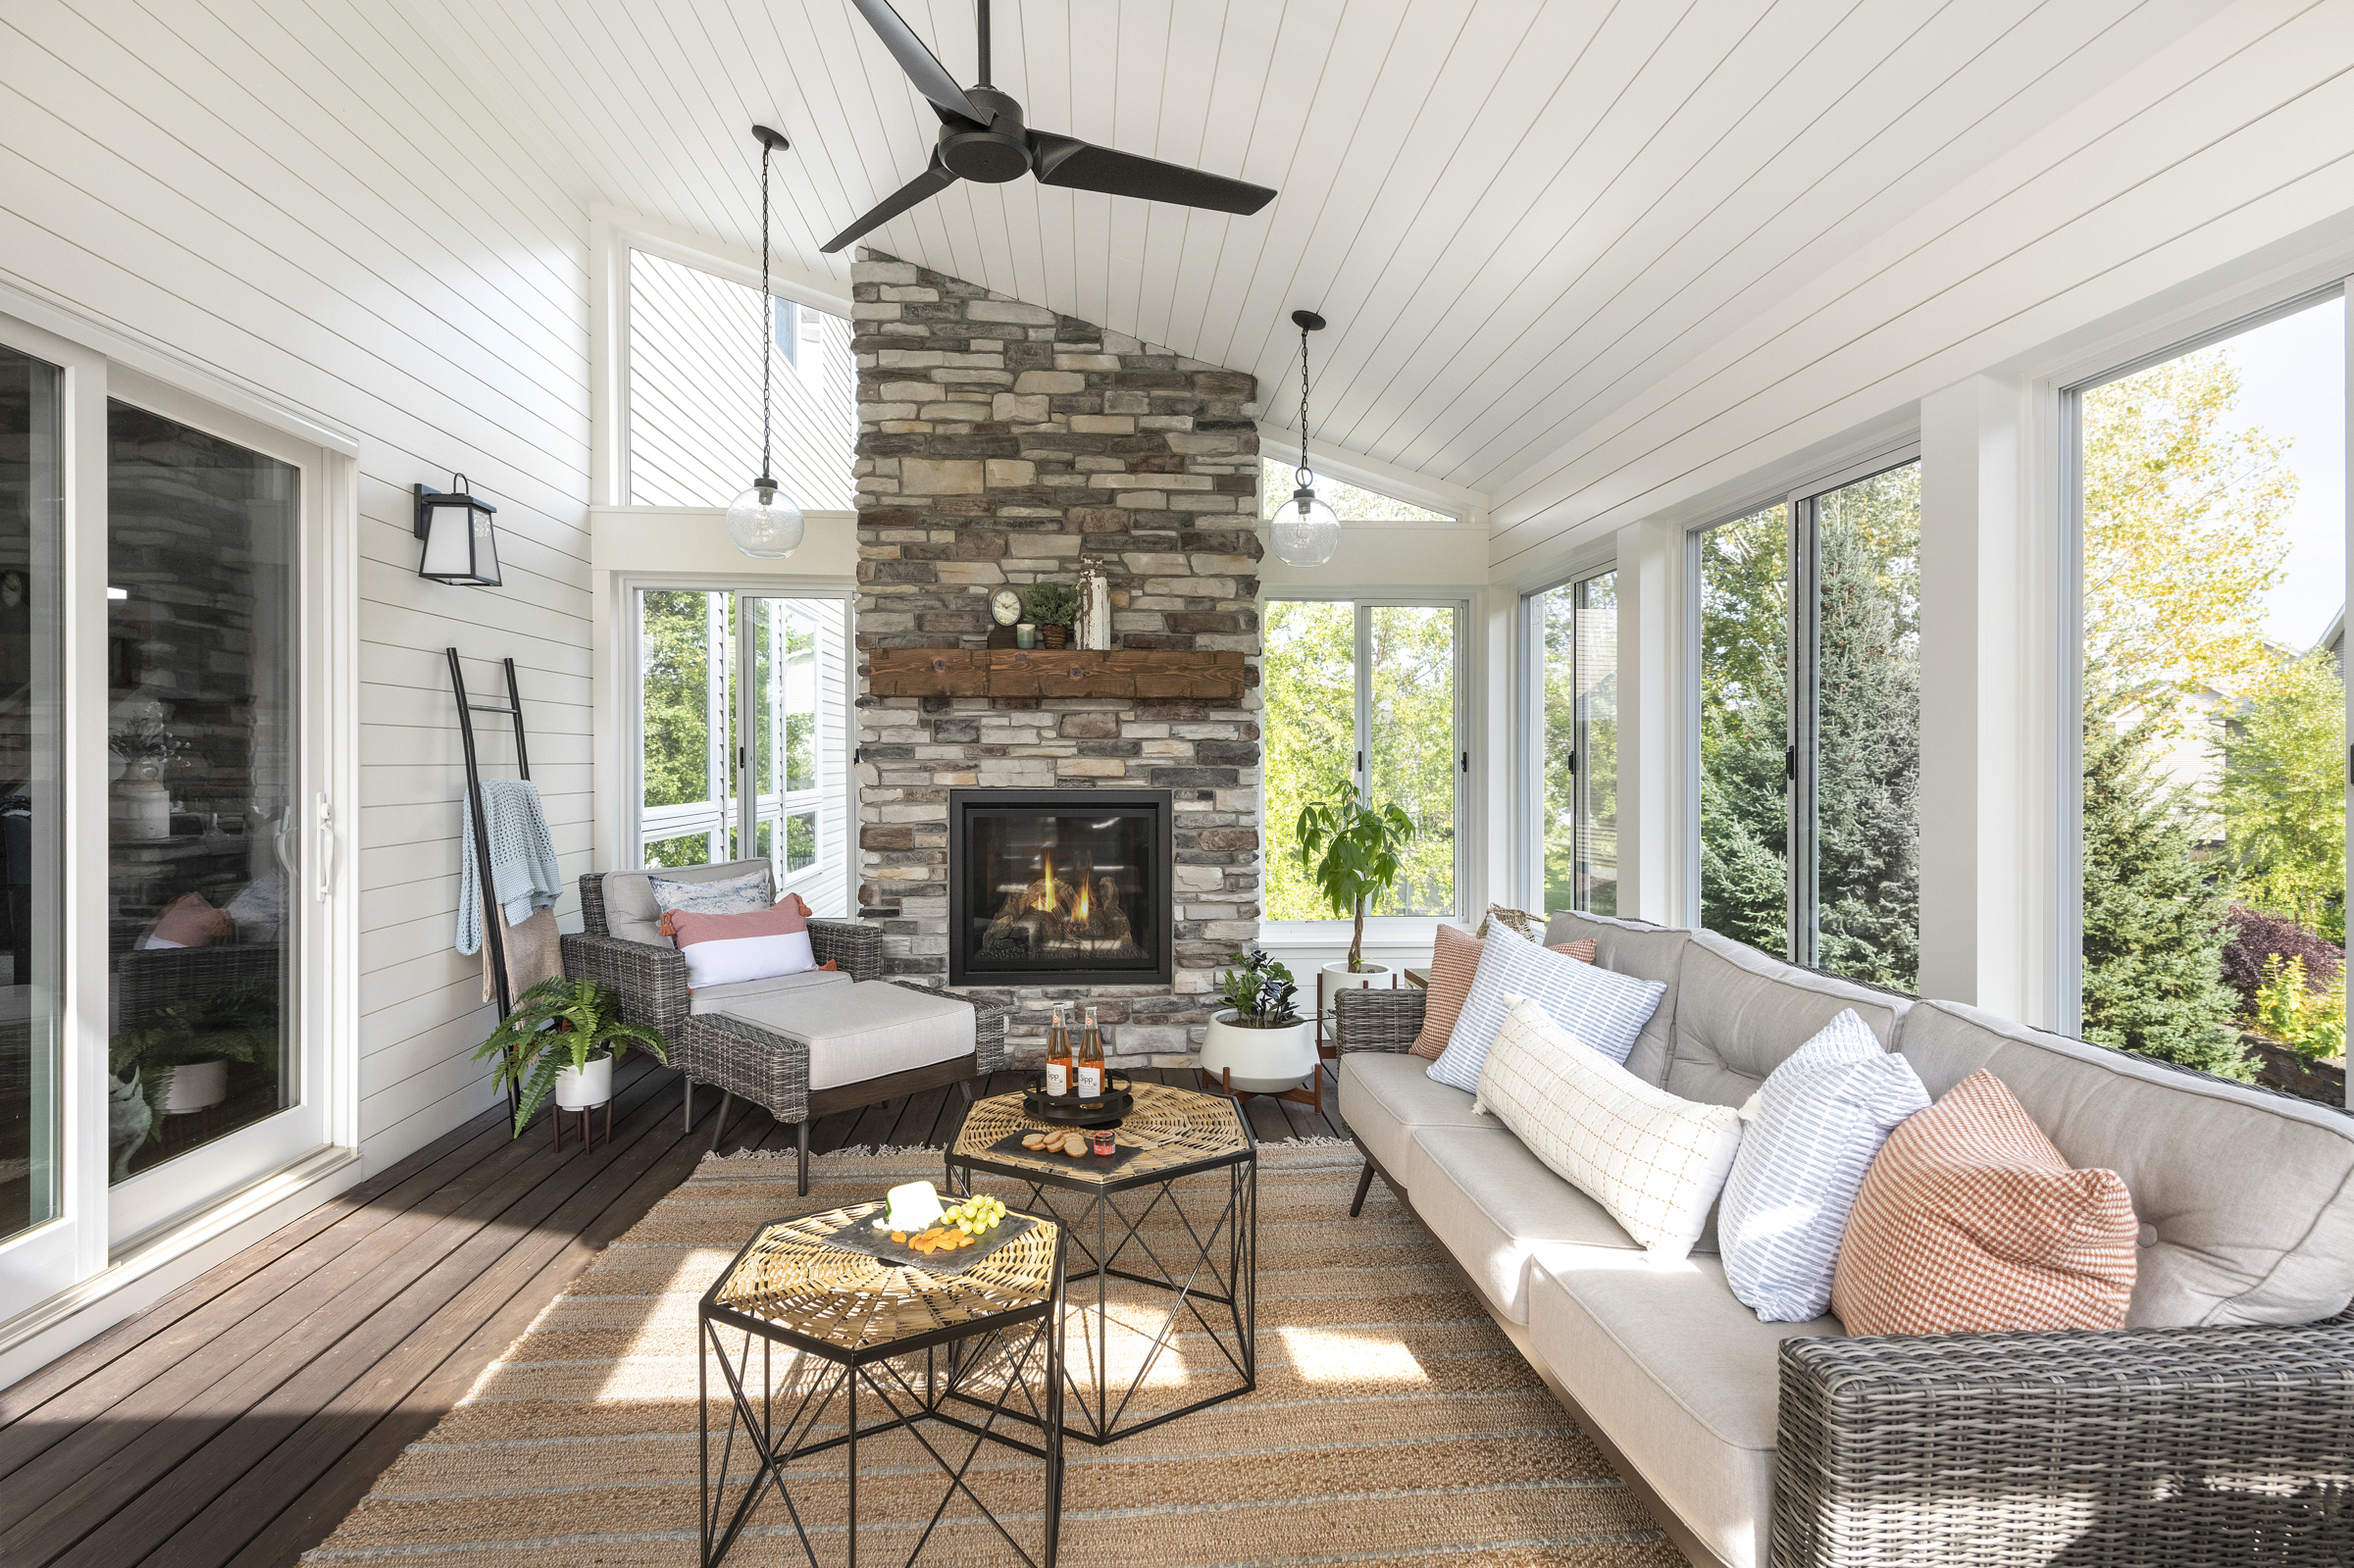 Fireside by Che Bella Interiors